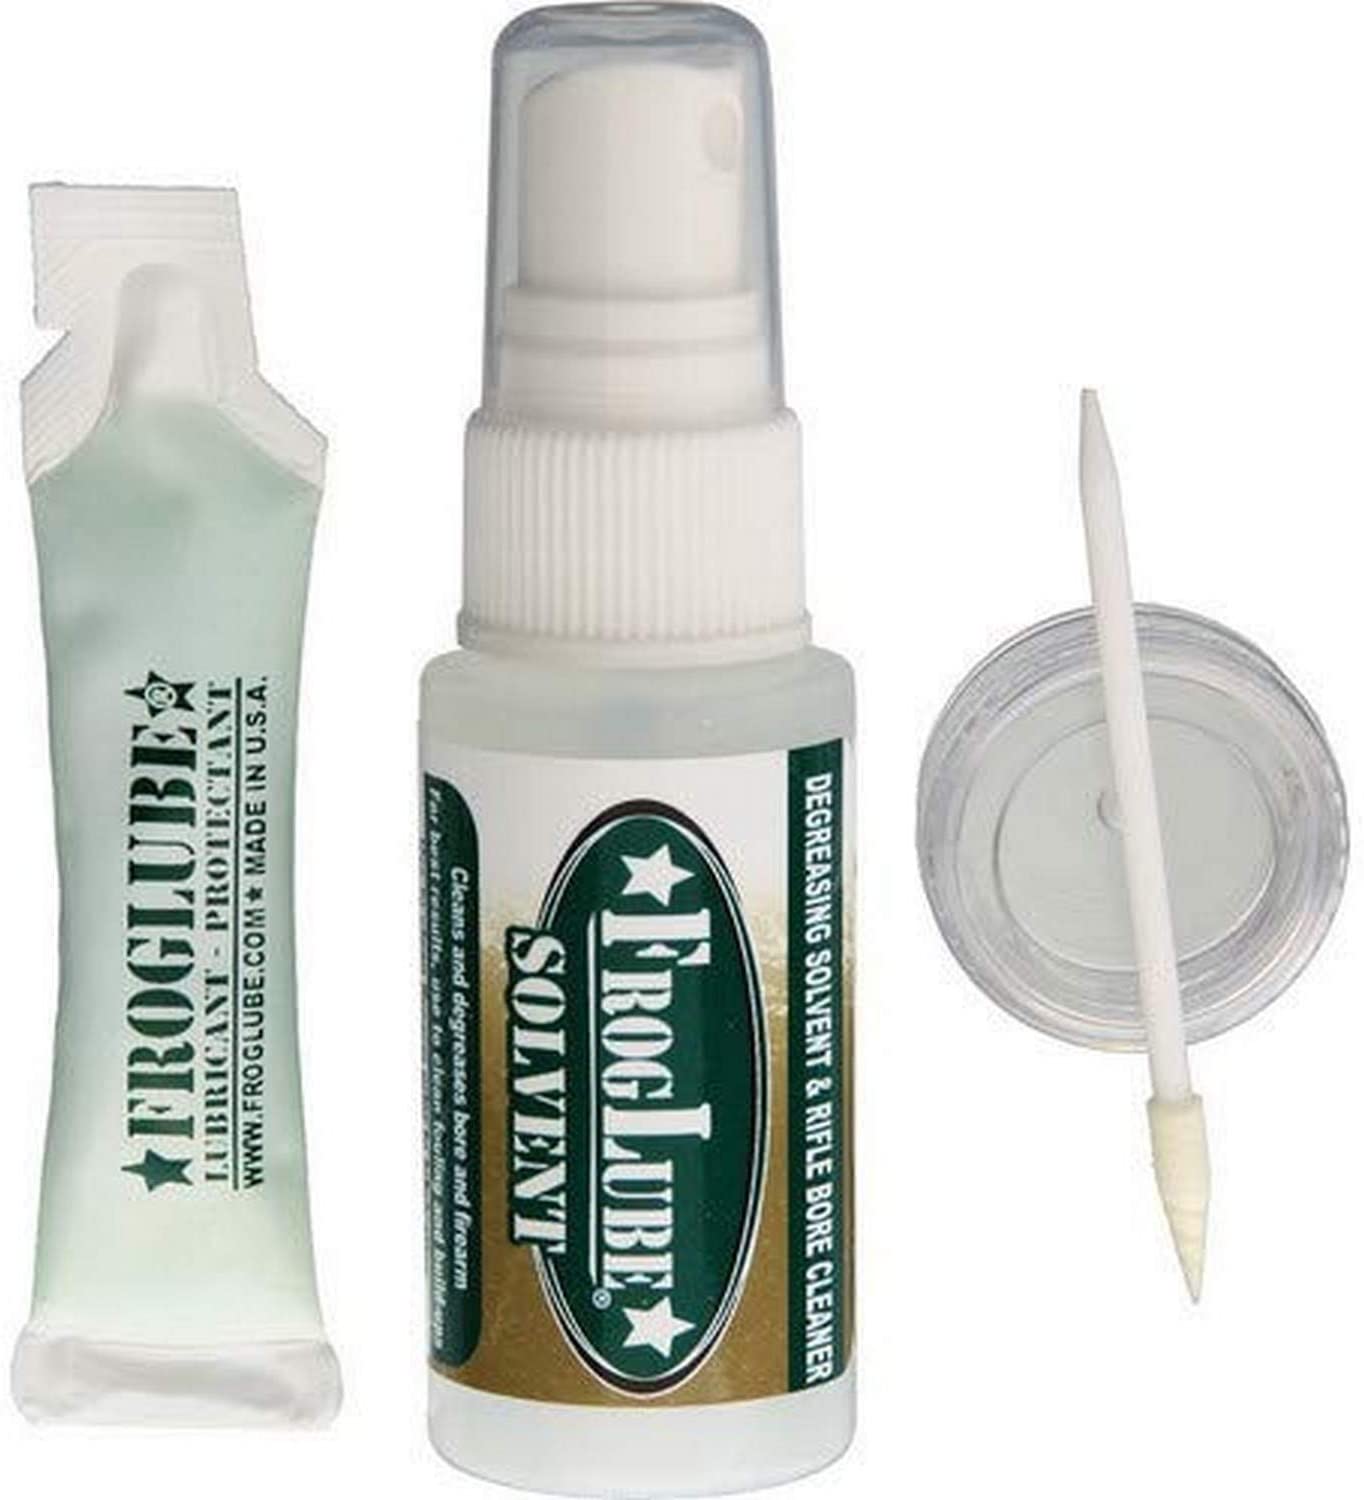 FrogLube Cleaning/Protection Kit